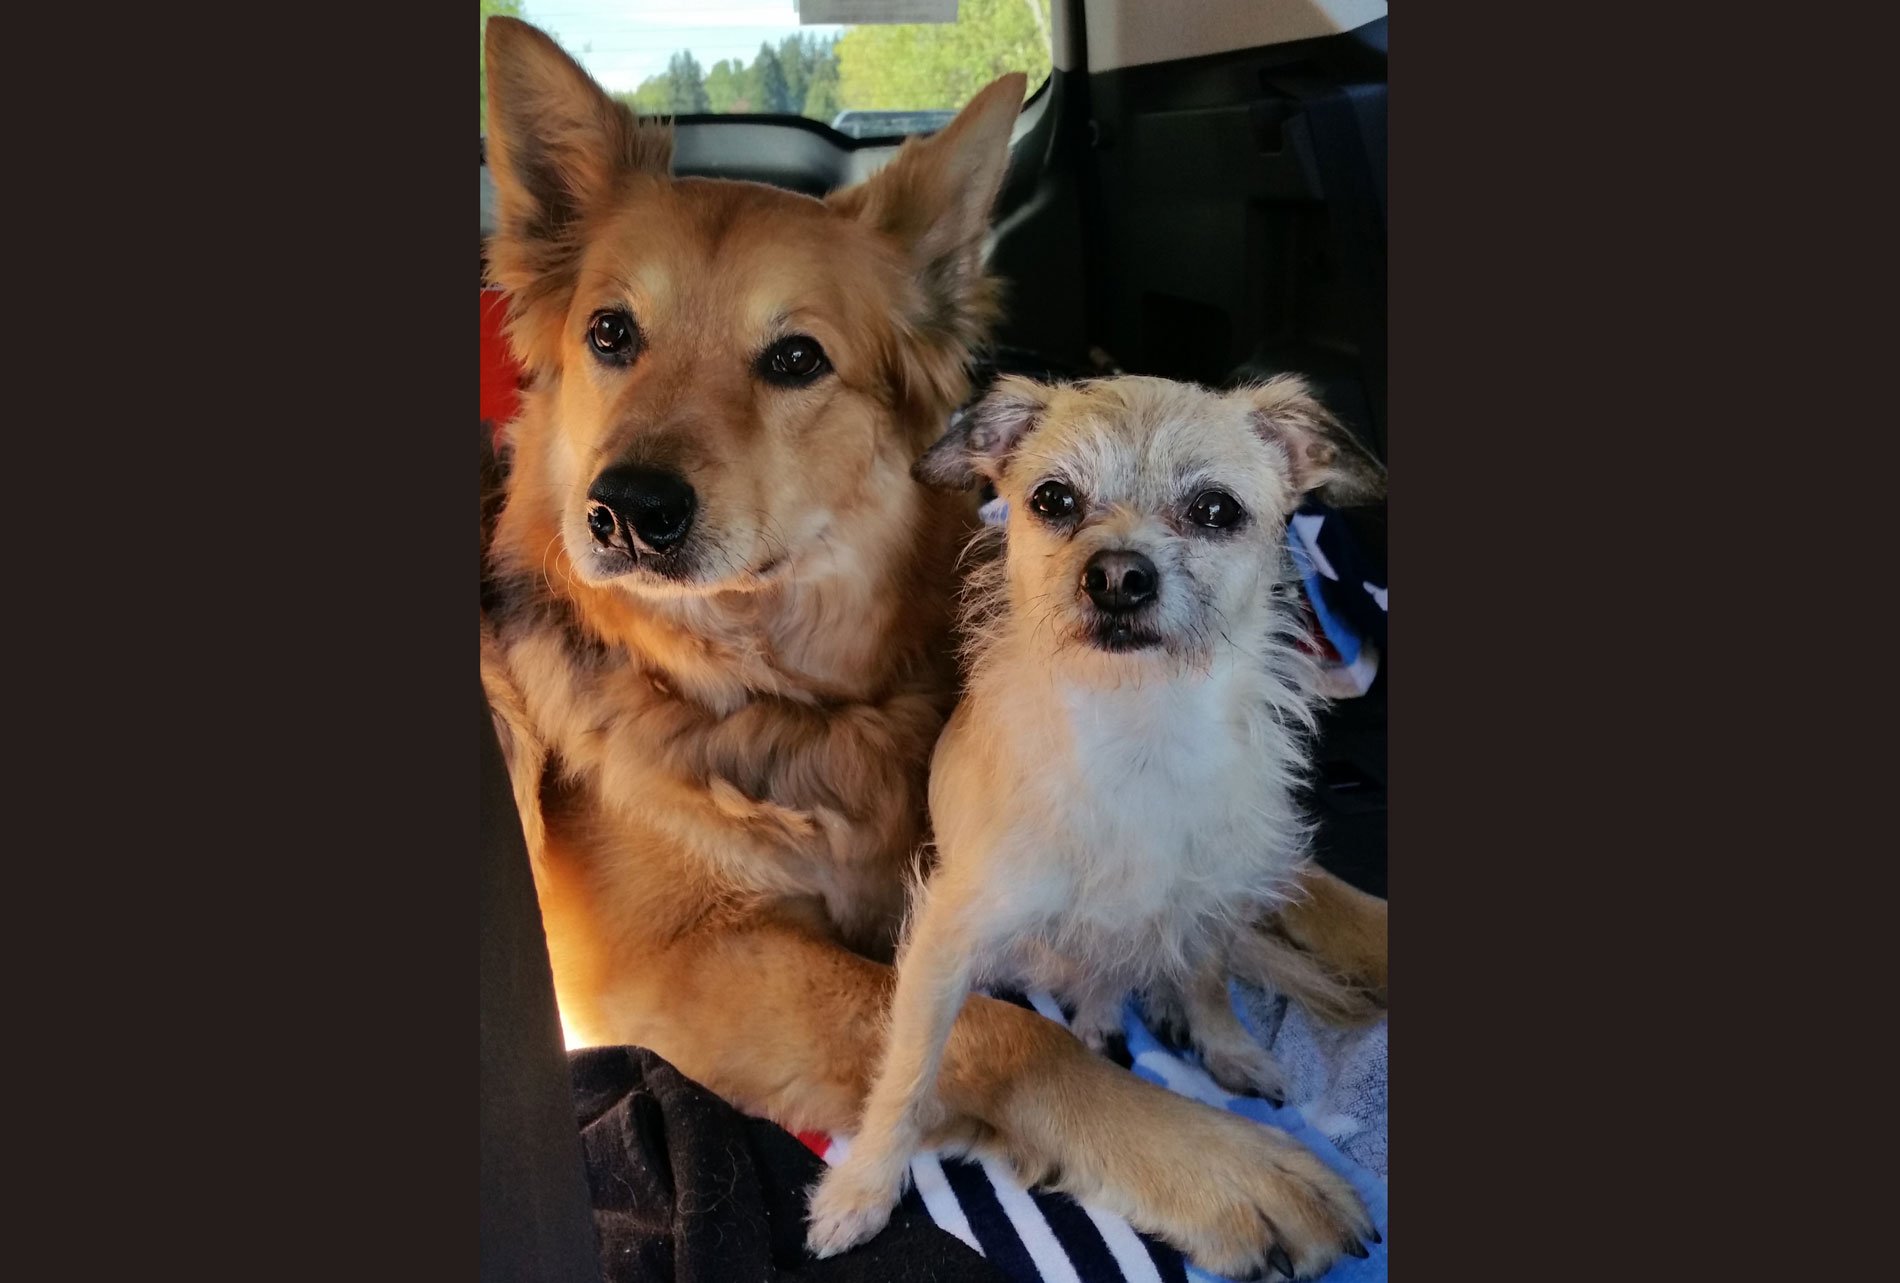 Sakari & Chloe have arthritis in dogs but it doesn't slow them down thanks to Glyde!